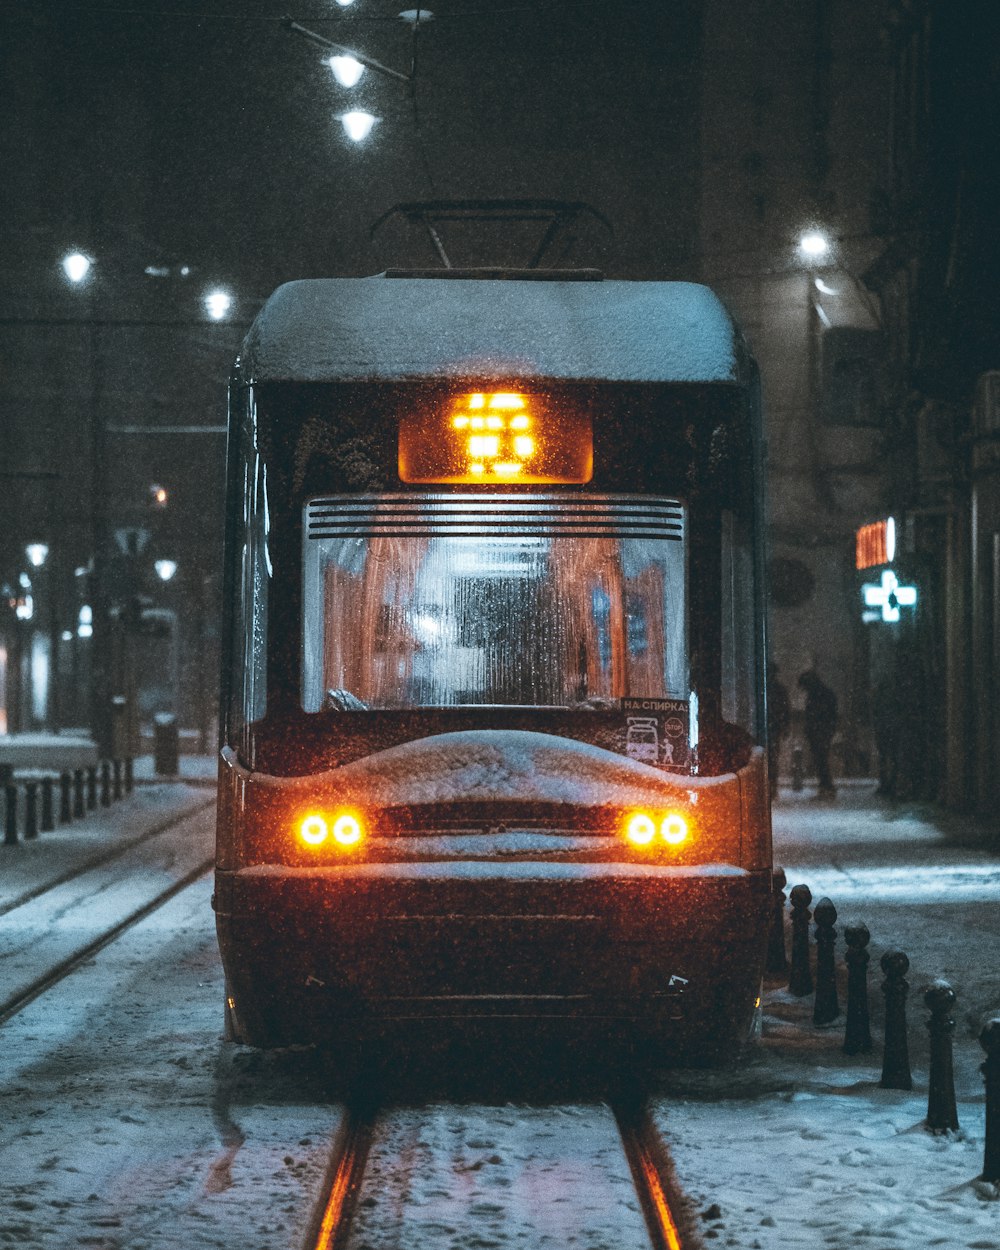 a city bus driving down a snowy street at night